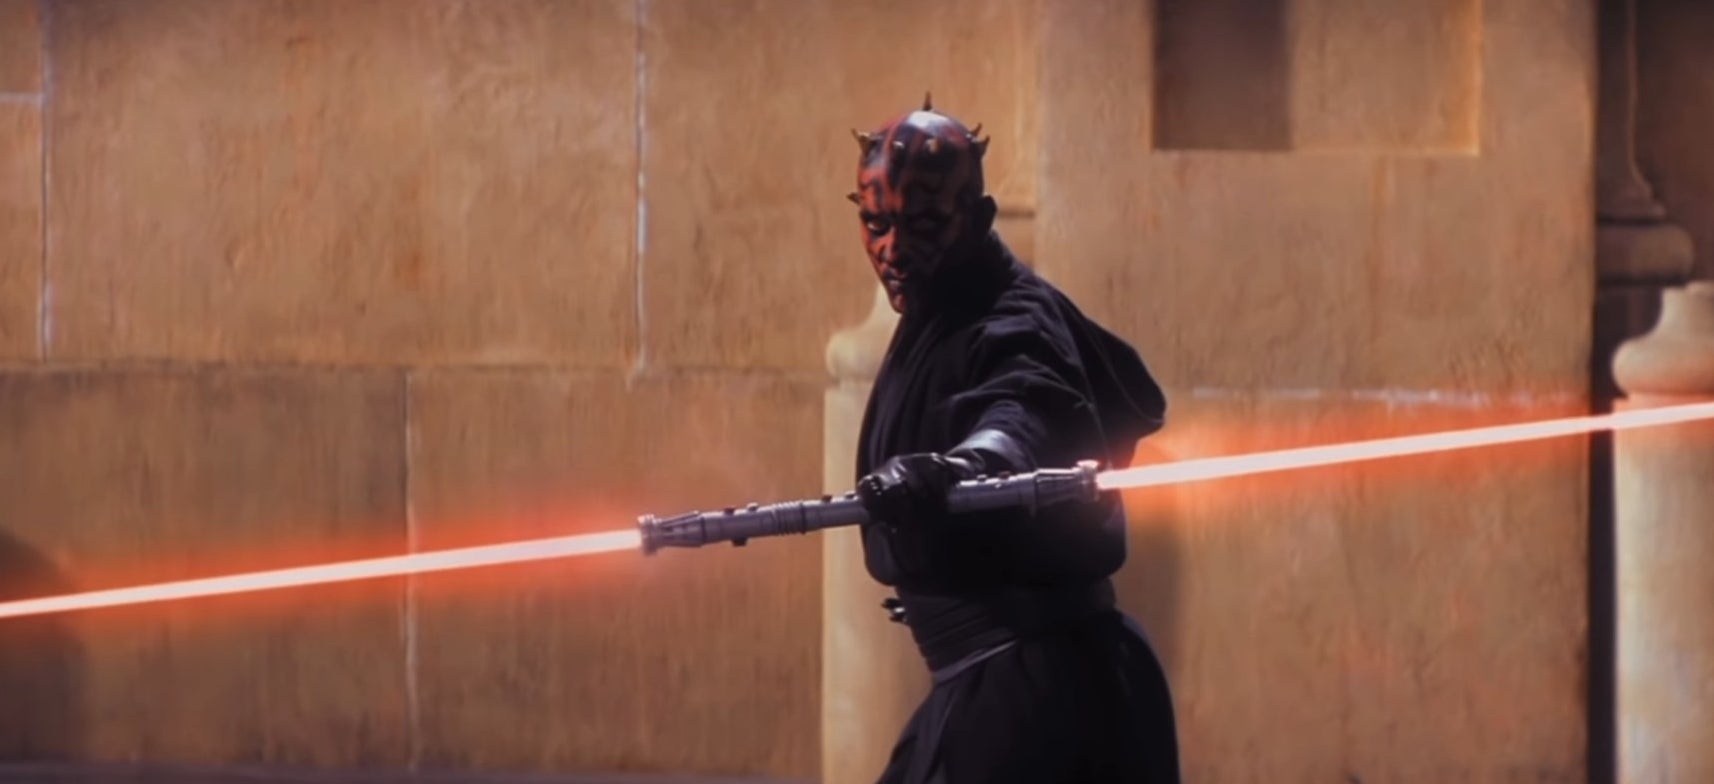 Darth Maul igniting his double-ended lightsaber in &quot;Star Wars: Episode I - The Phantom Menace&quot;